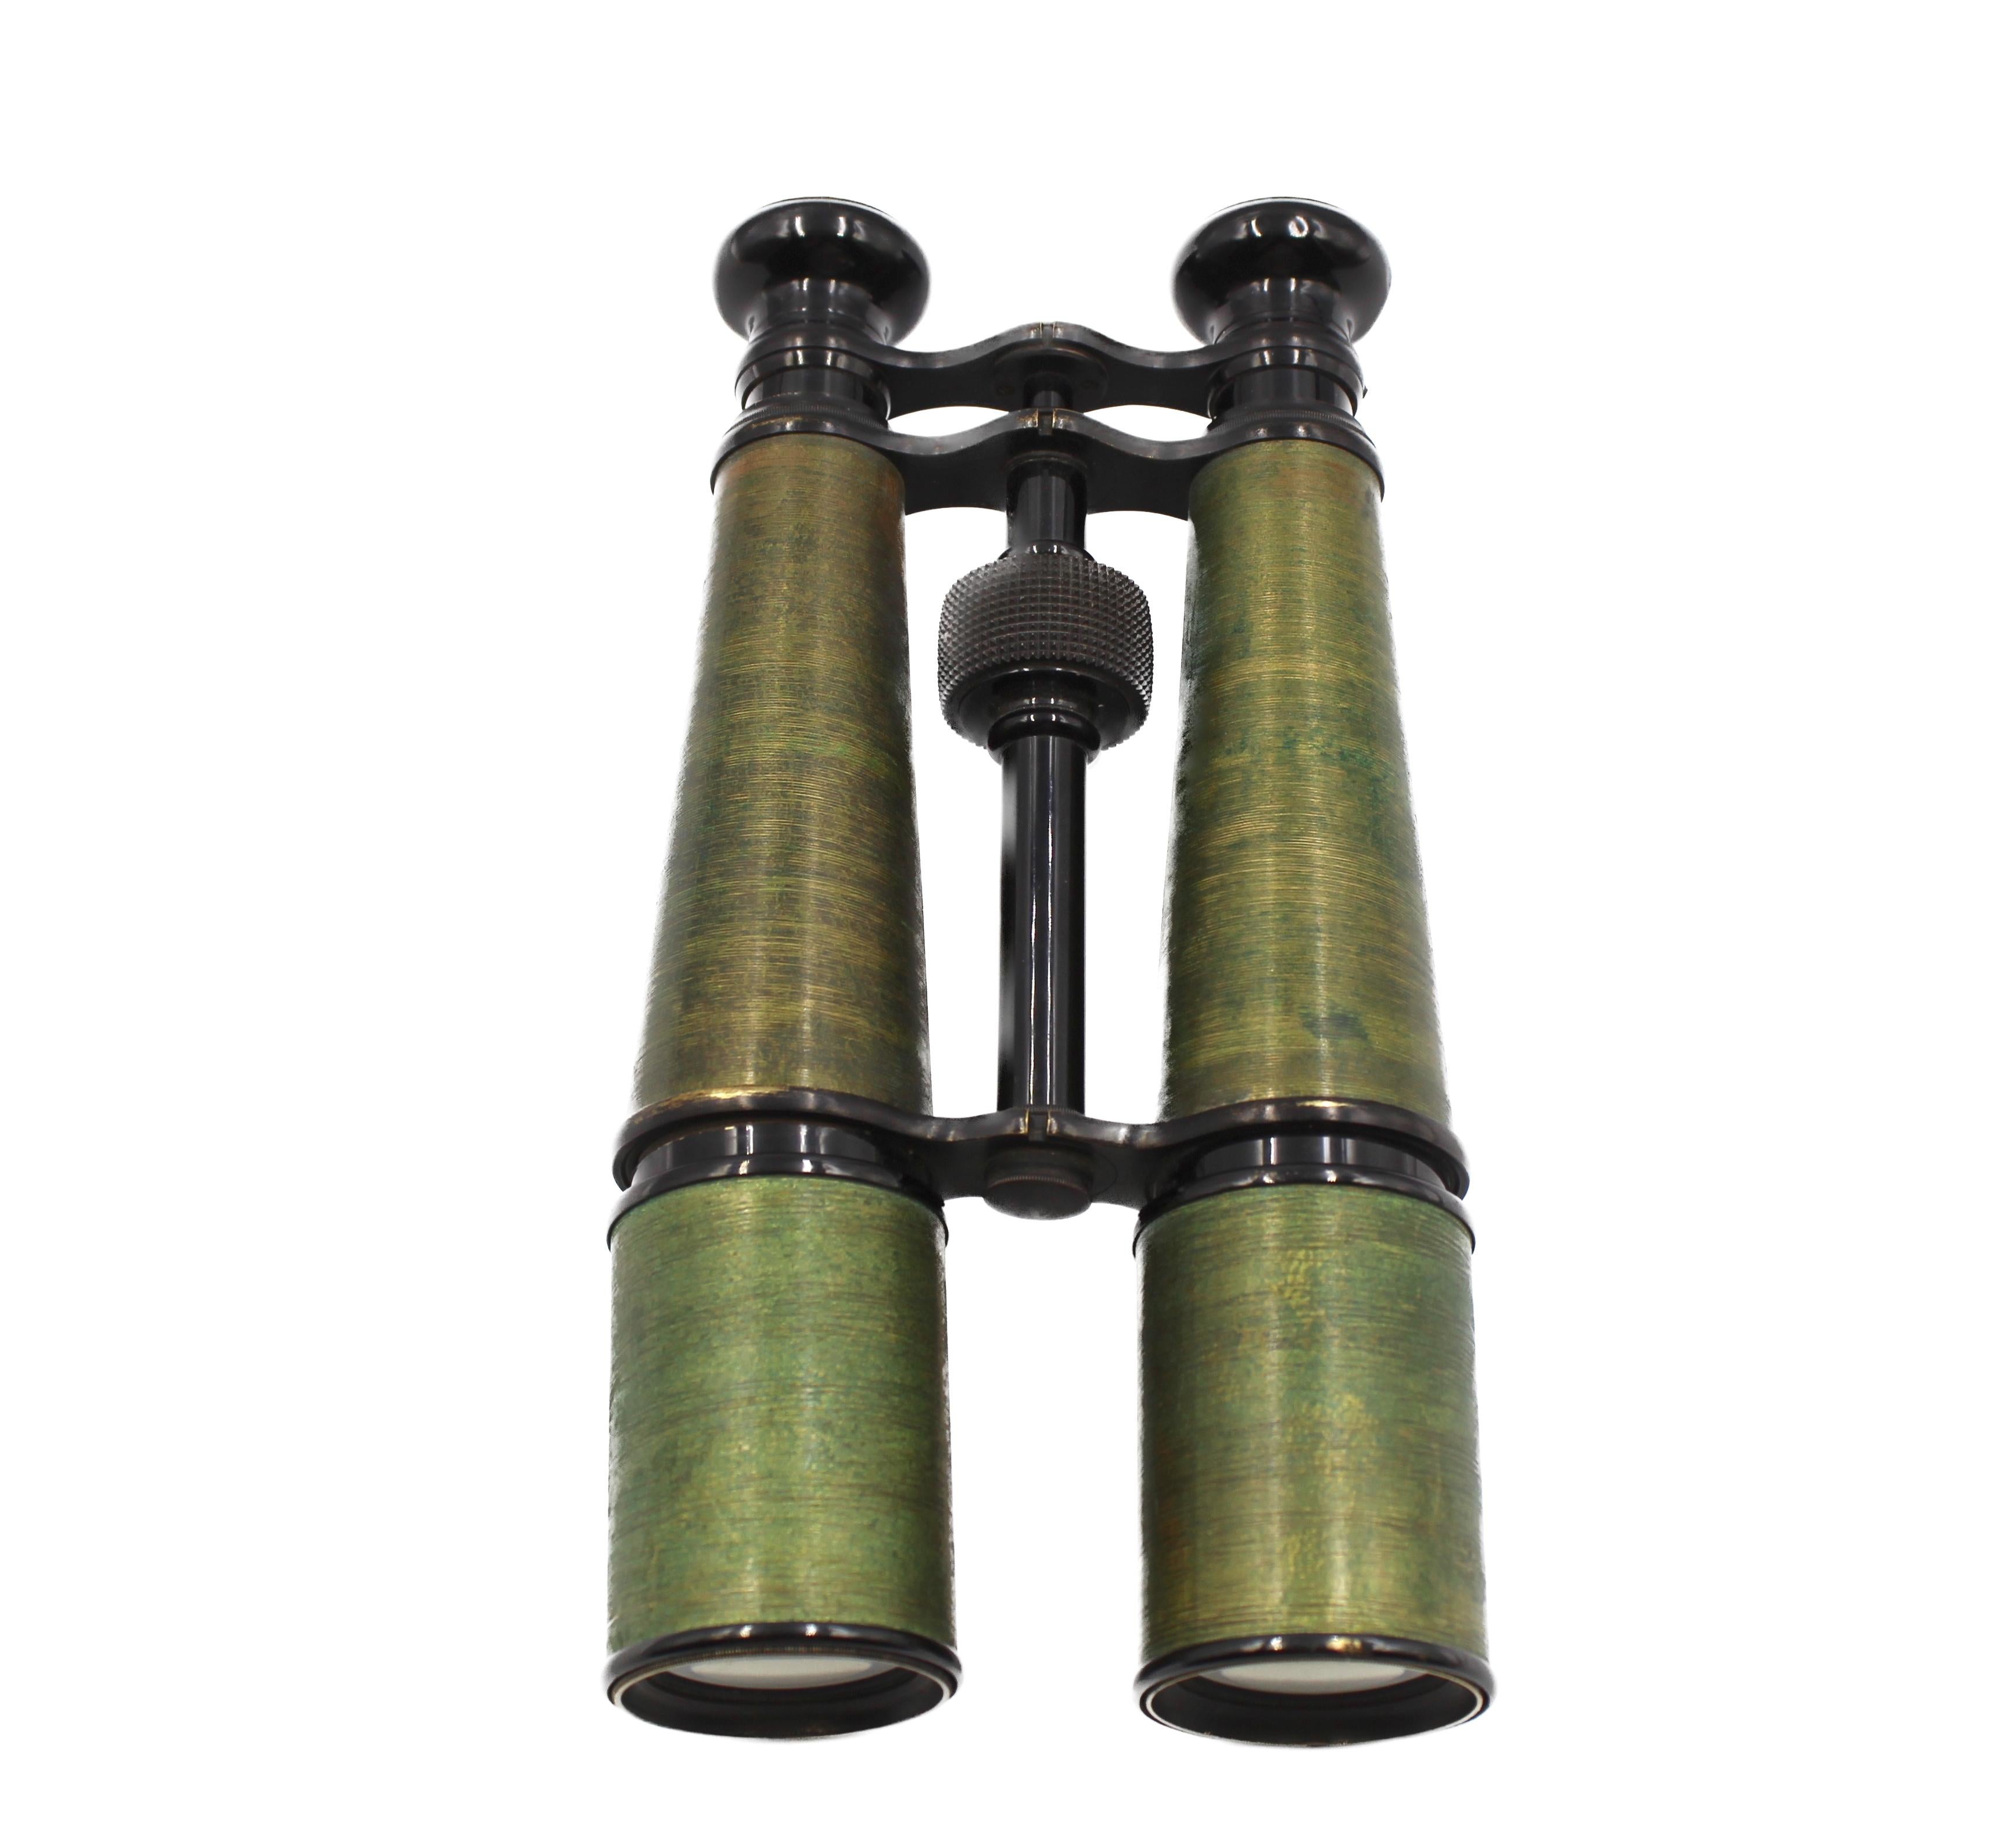 Presented is an original pair of Civil War-era field glasses. The glasses, an intricate example of brass and glass technology, were made in Philadelphia, Pennsylvania by the company Queen & Co. The glasses are stamped “Queen & Co., Phila” along the